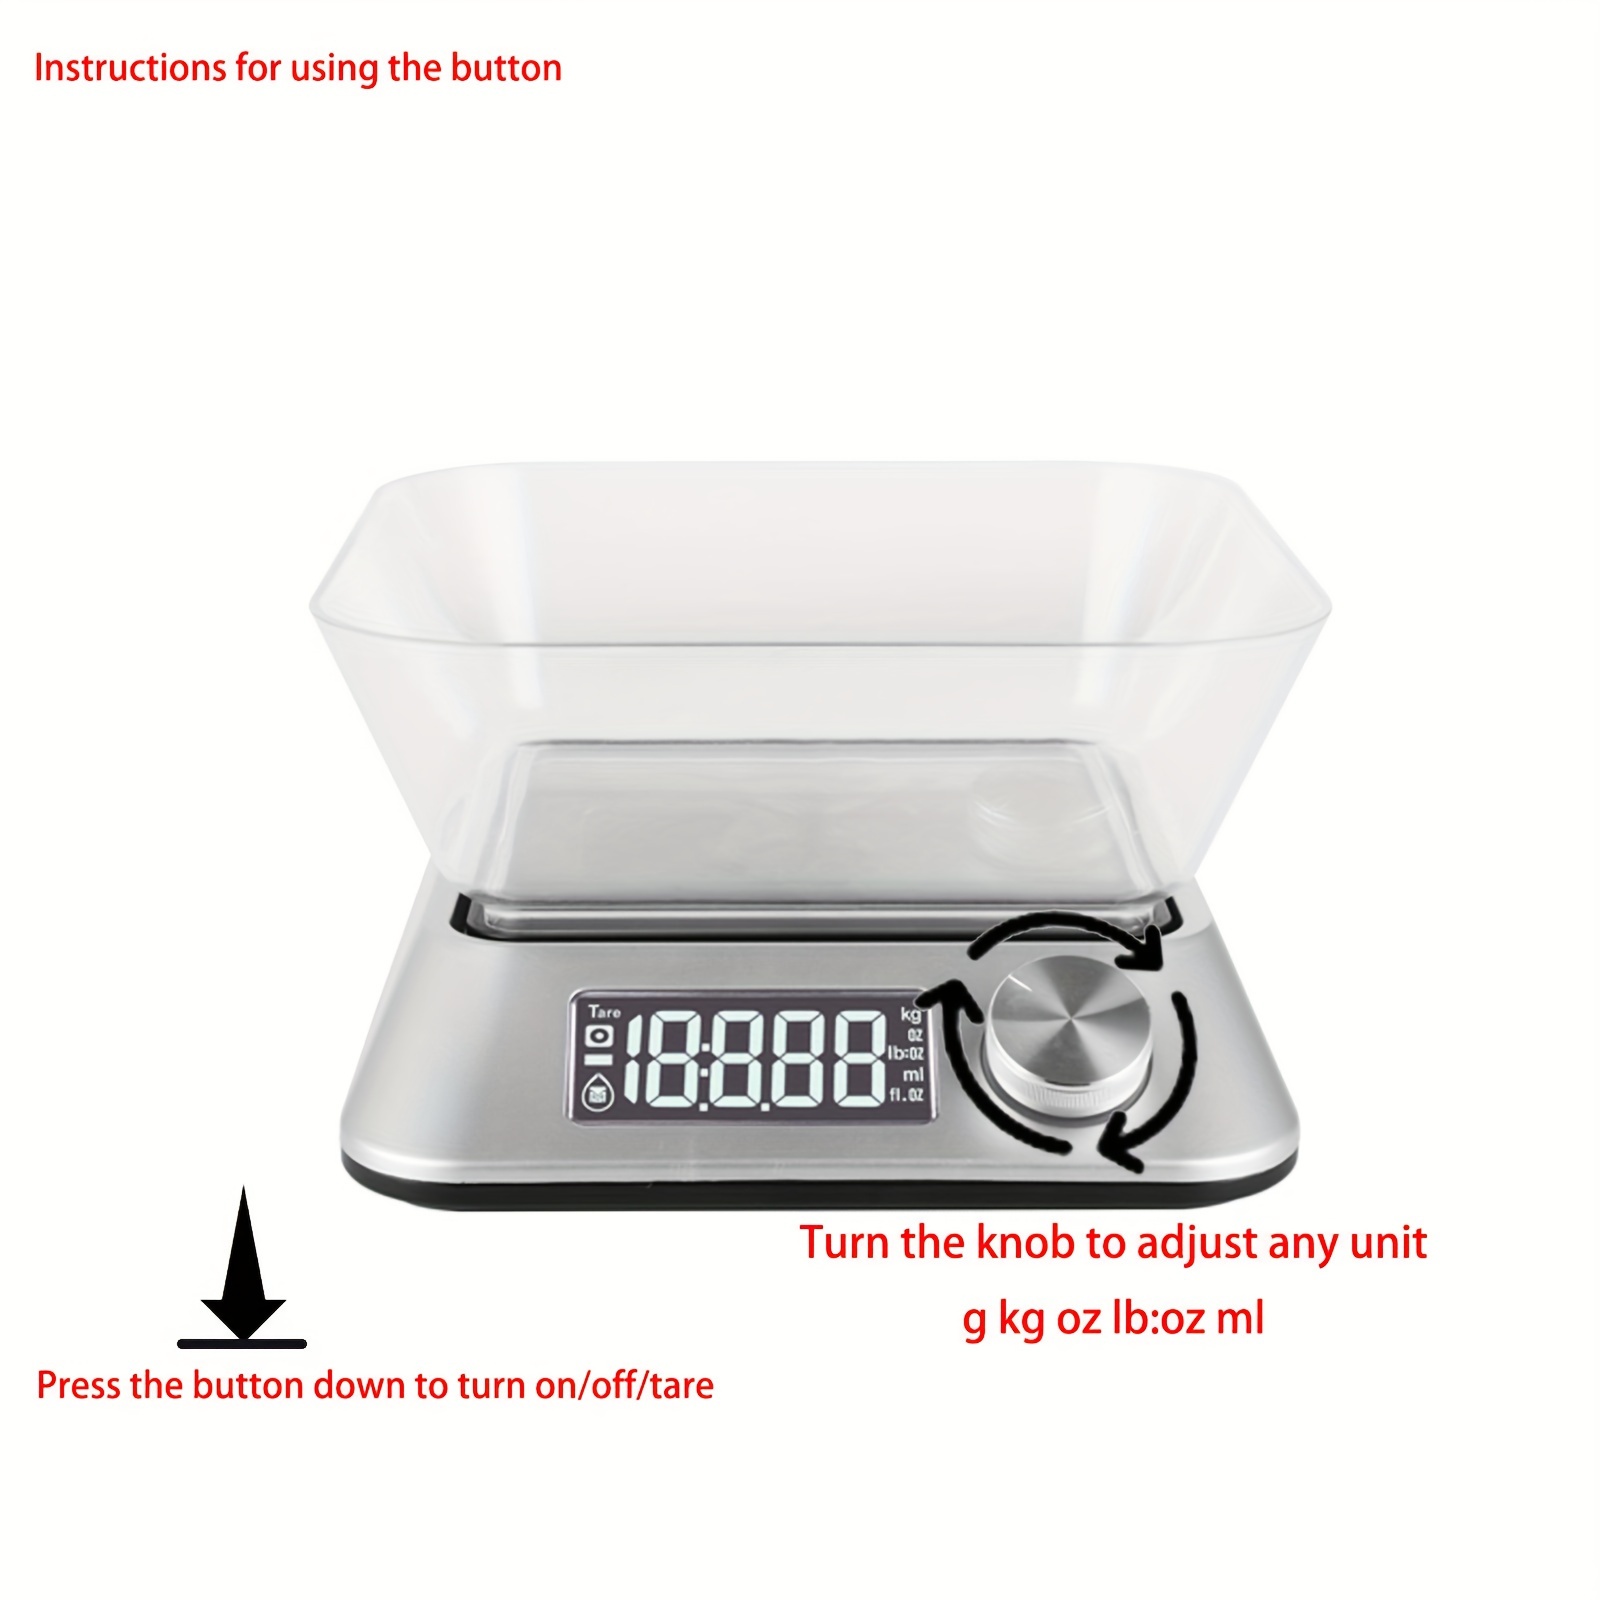  Digital Kitchen/Food Scale Grams and Ounces - Ultra  Slim/Multifunction/Tare Function Kitchen Weight Scales for Cooking & Baking  - 22lb/10kg Capacity,0.04oz/1g(Batteries Included): Home & Kitchen